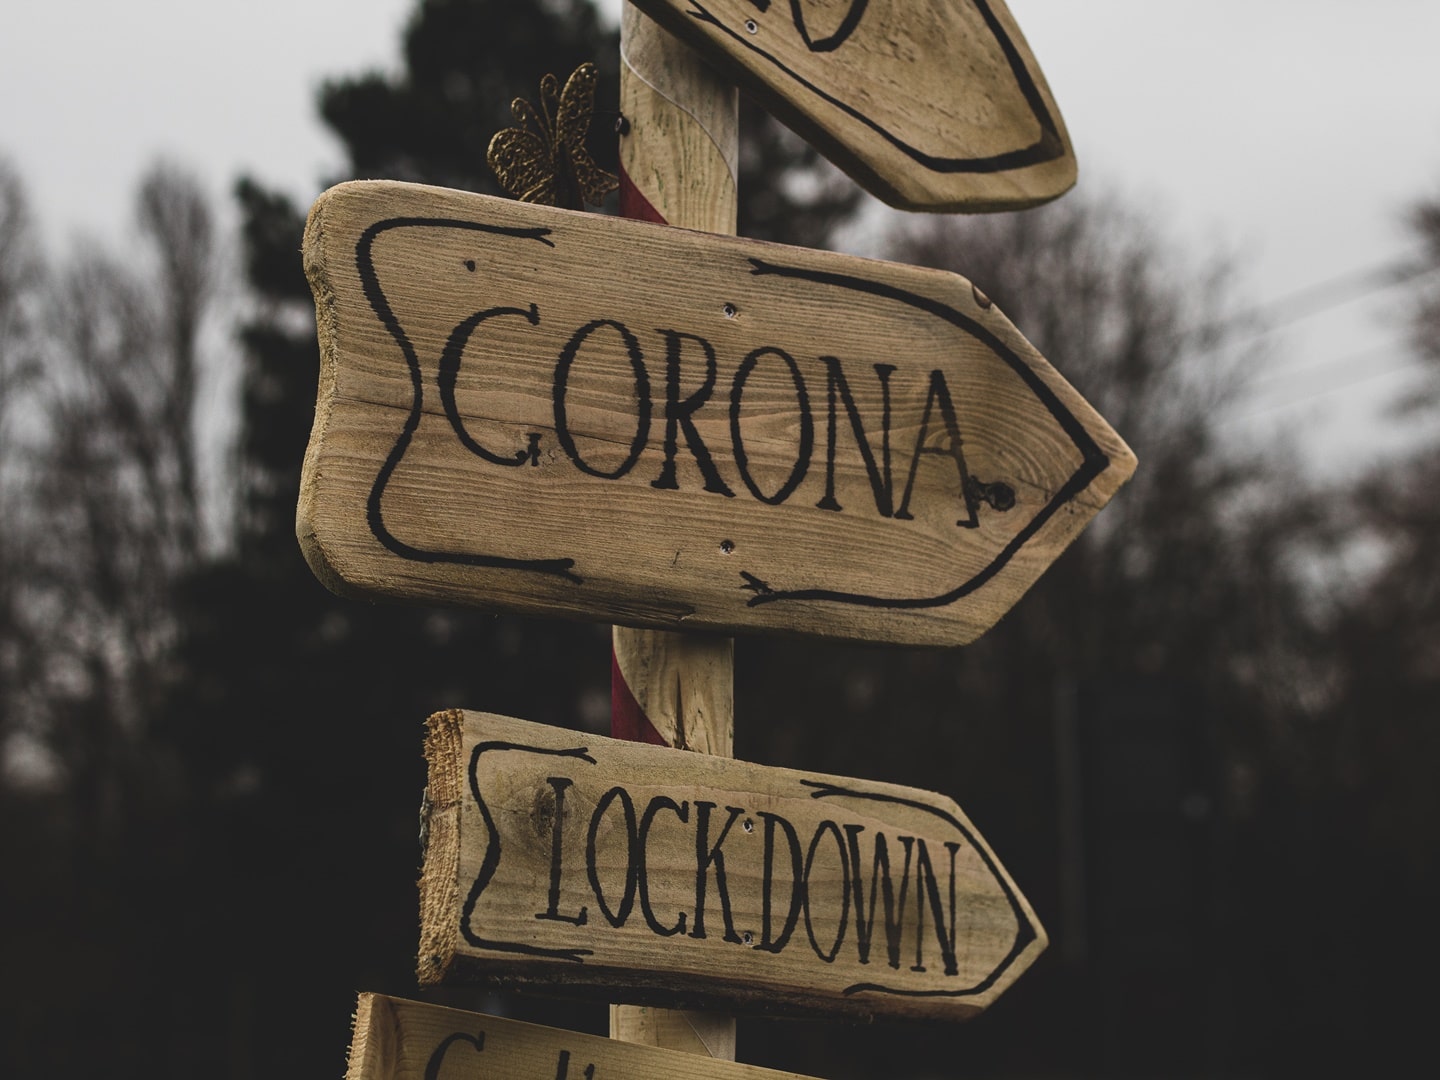 wooden arrows pointing east with corona and lockdown written on them in black